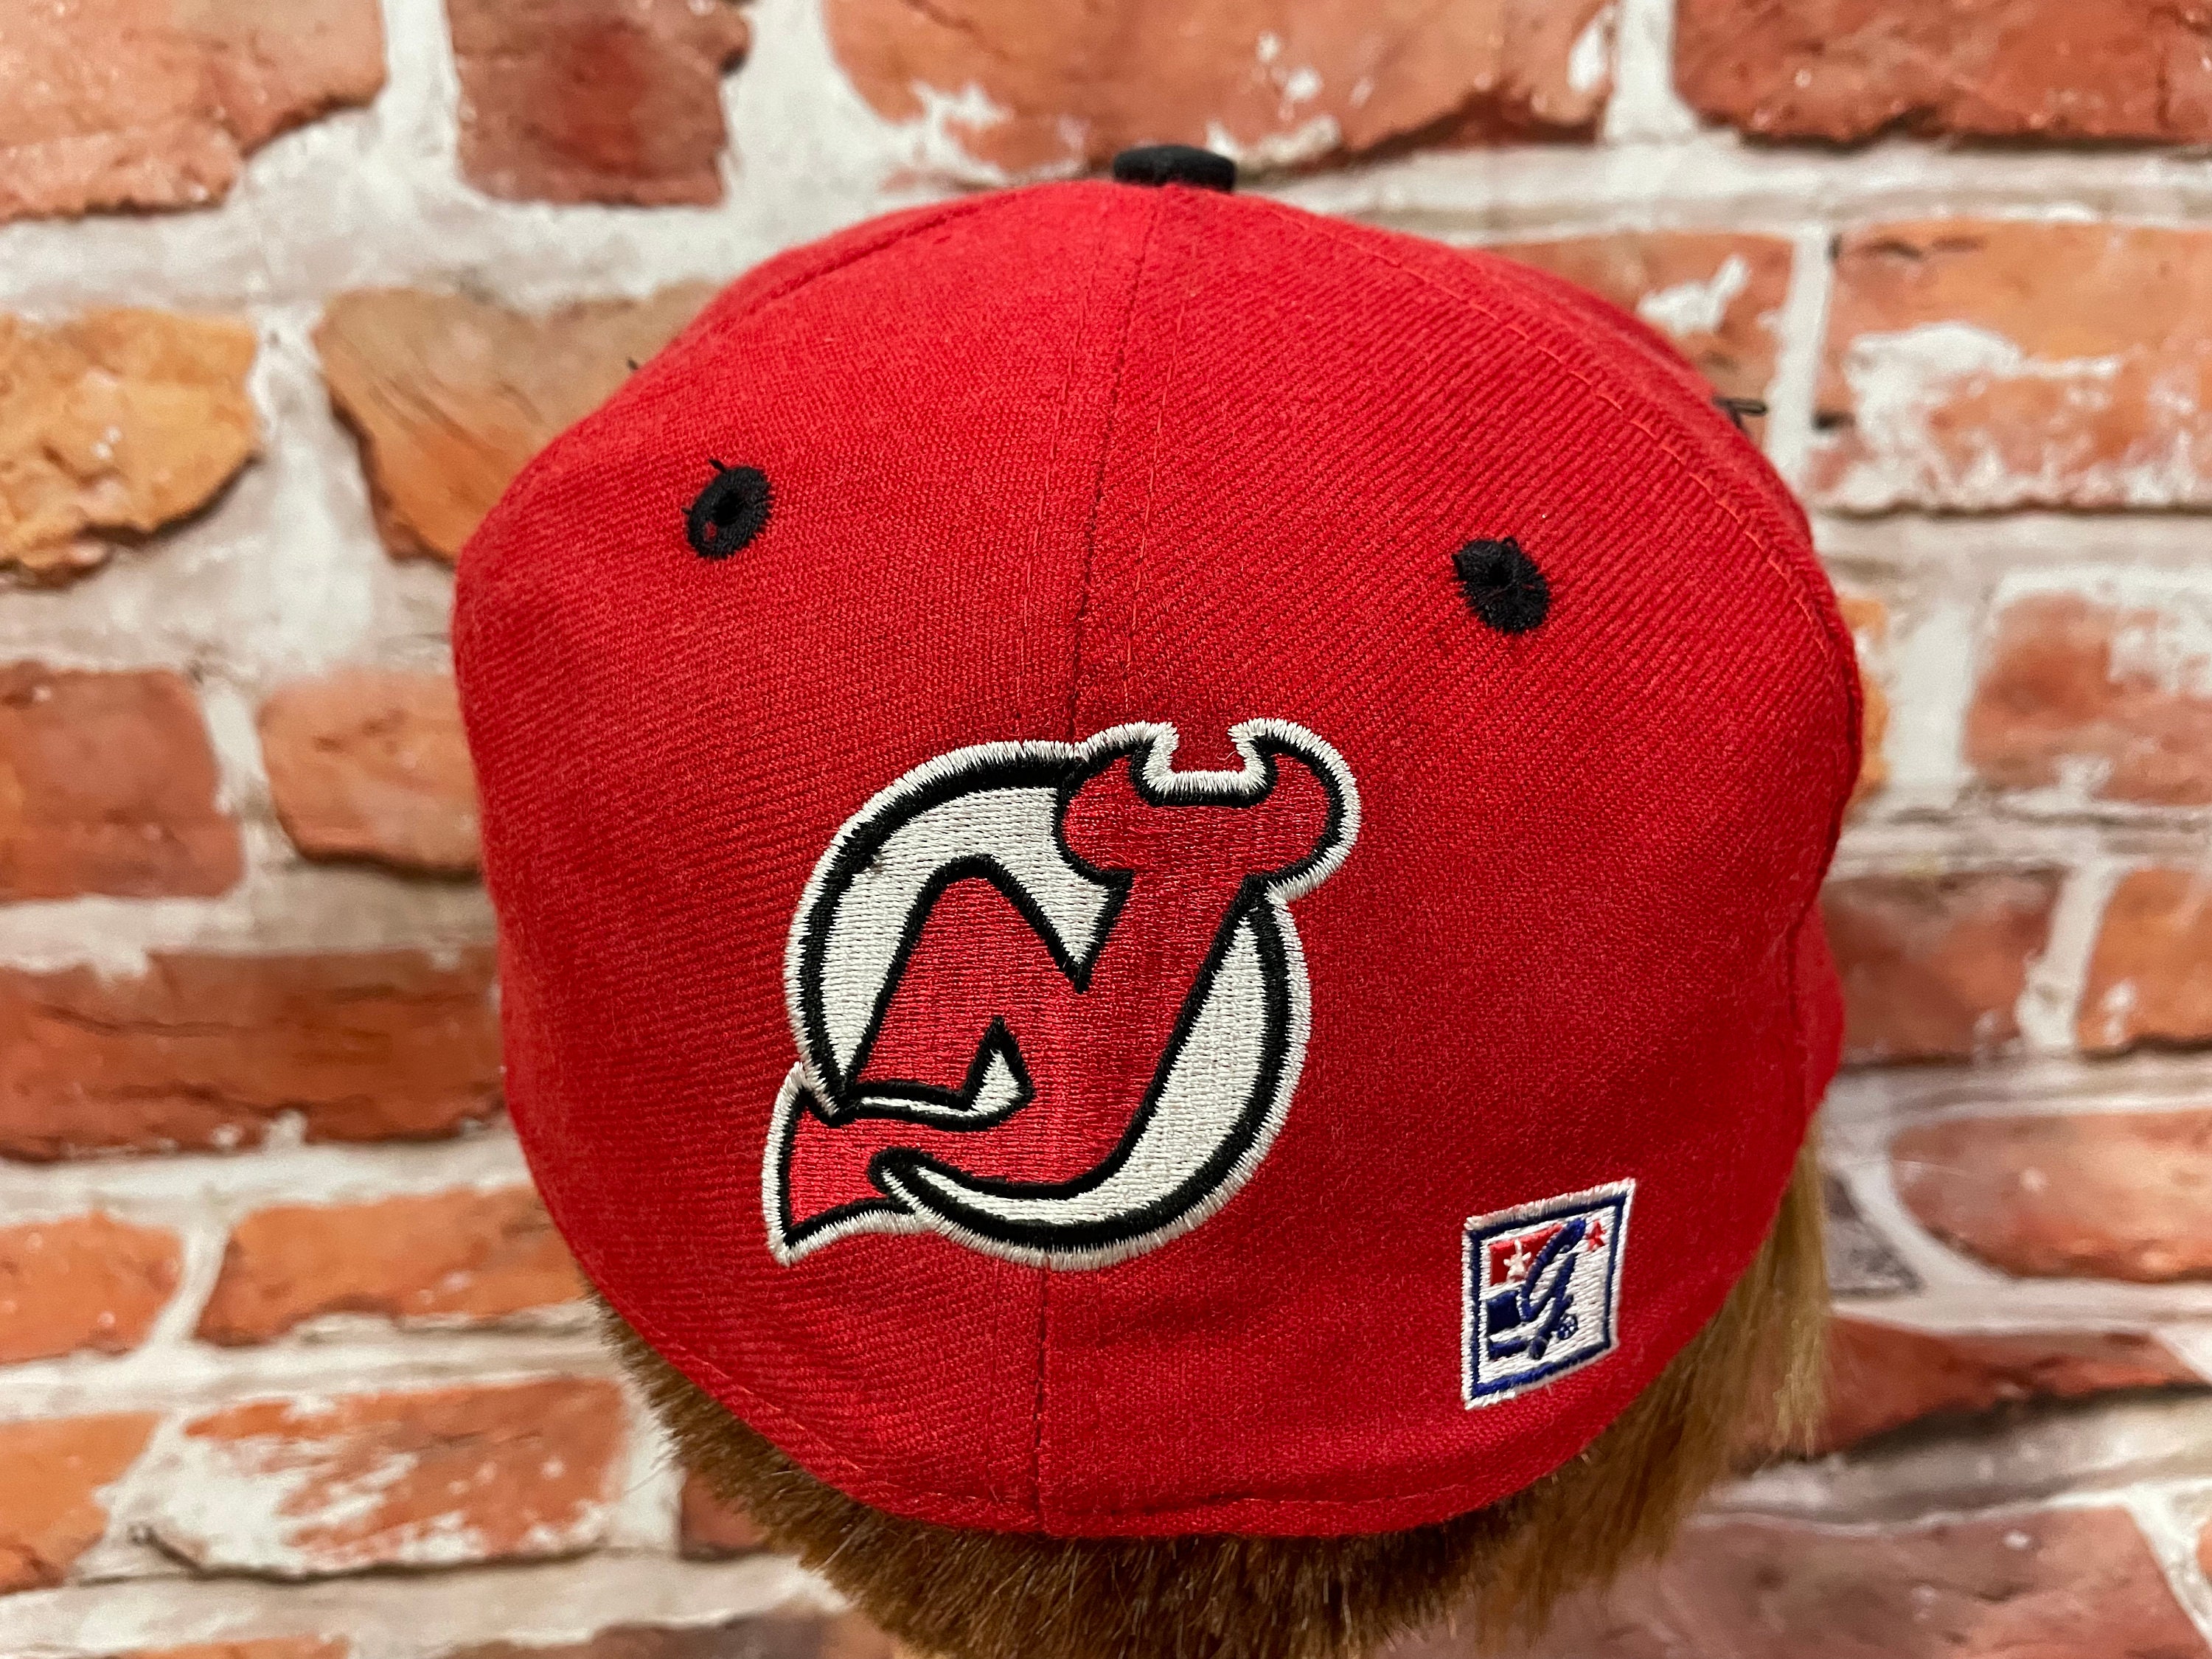 Vintage New Jersey Devils Fitted Hat New Era Made USA Size 7 3/8 NHL Hockey New Jersey NJ 1990s 90s